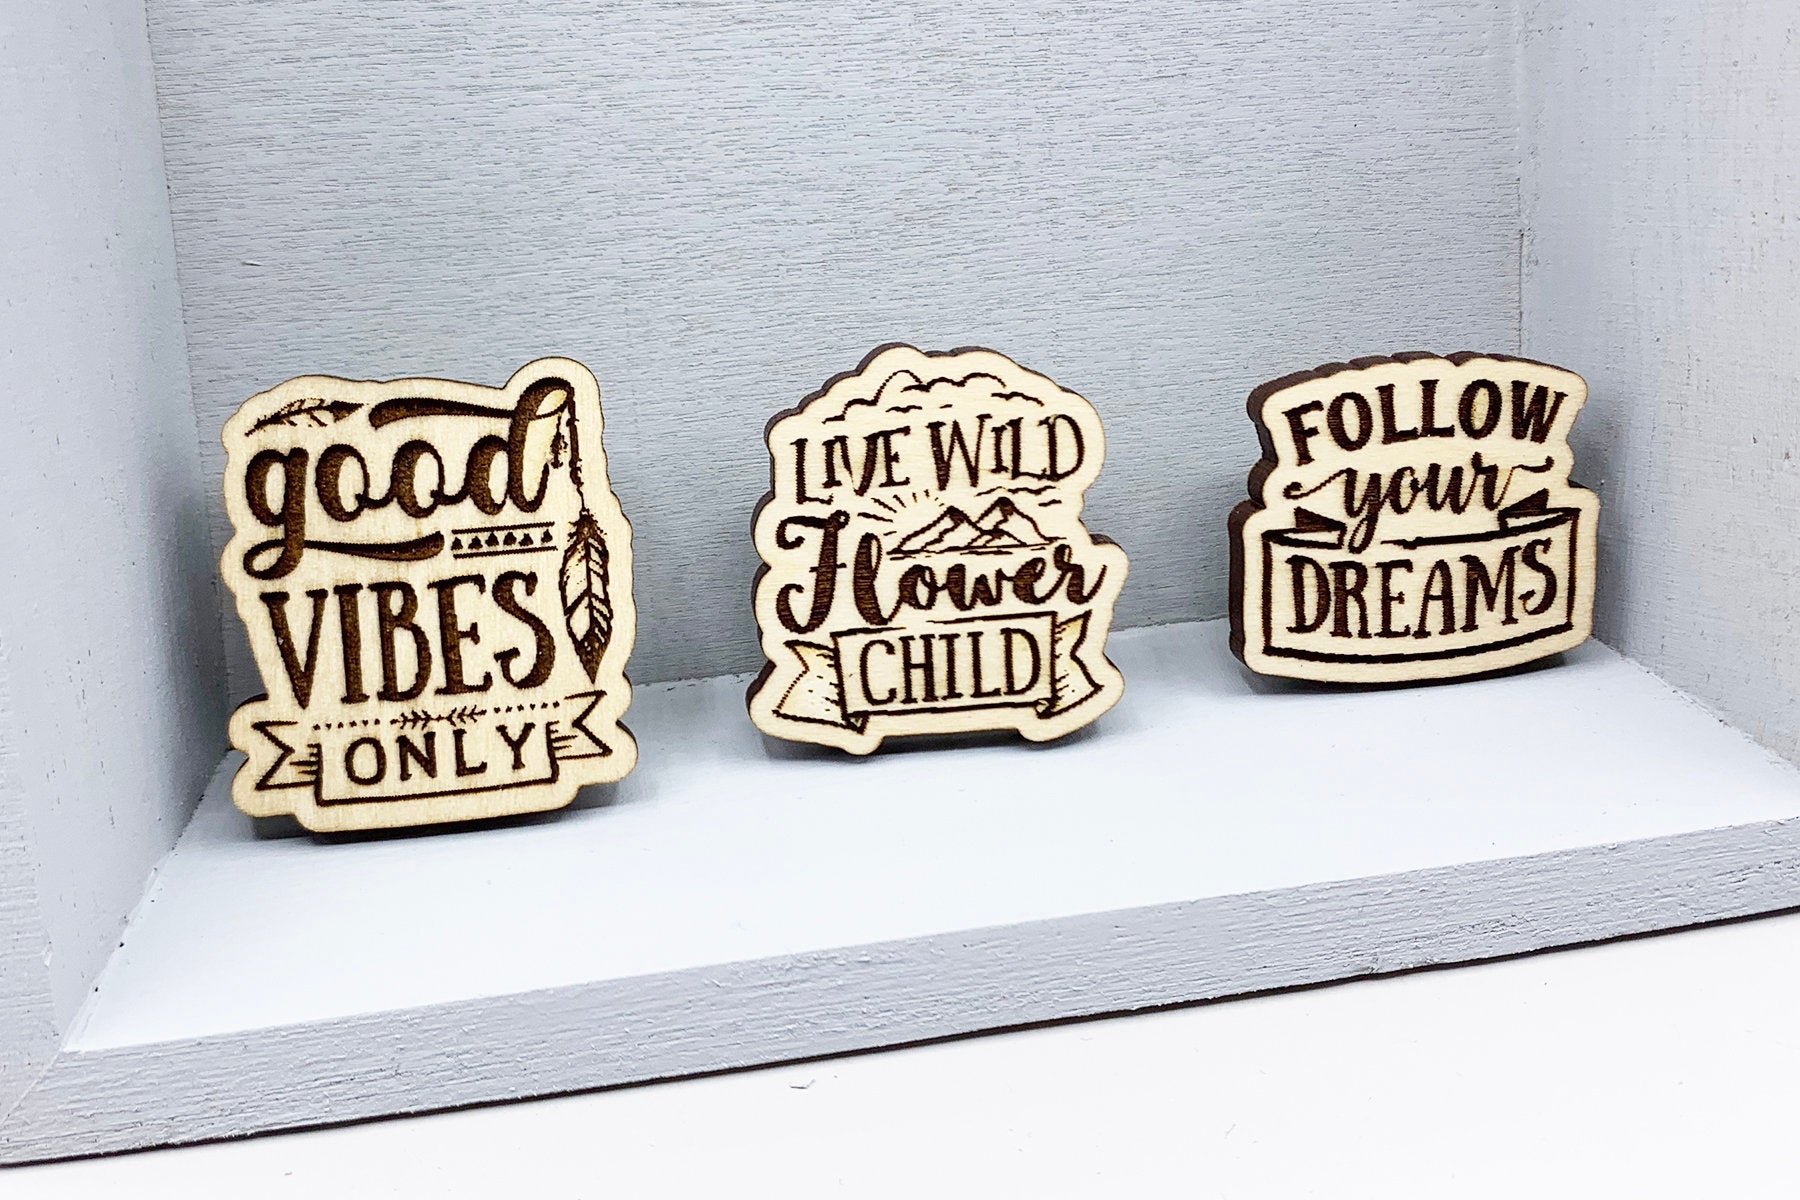 Boho Inspired Lapel Pin Collection - Laser Engraved